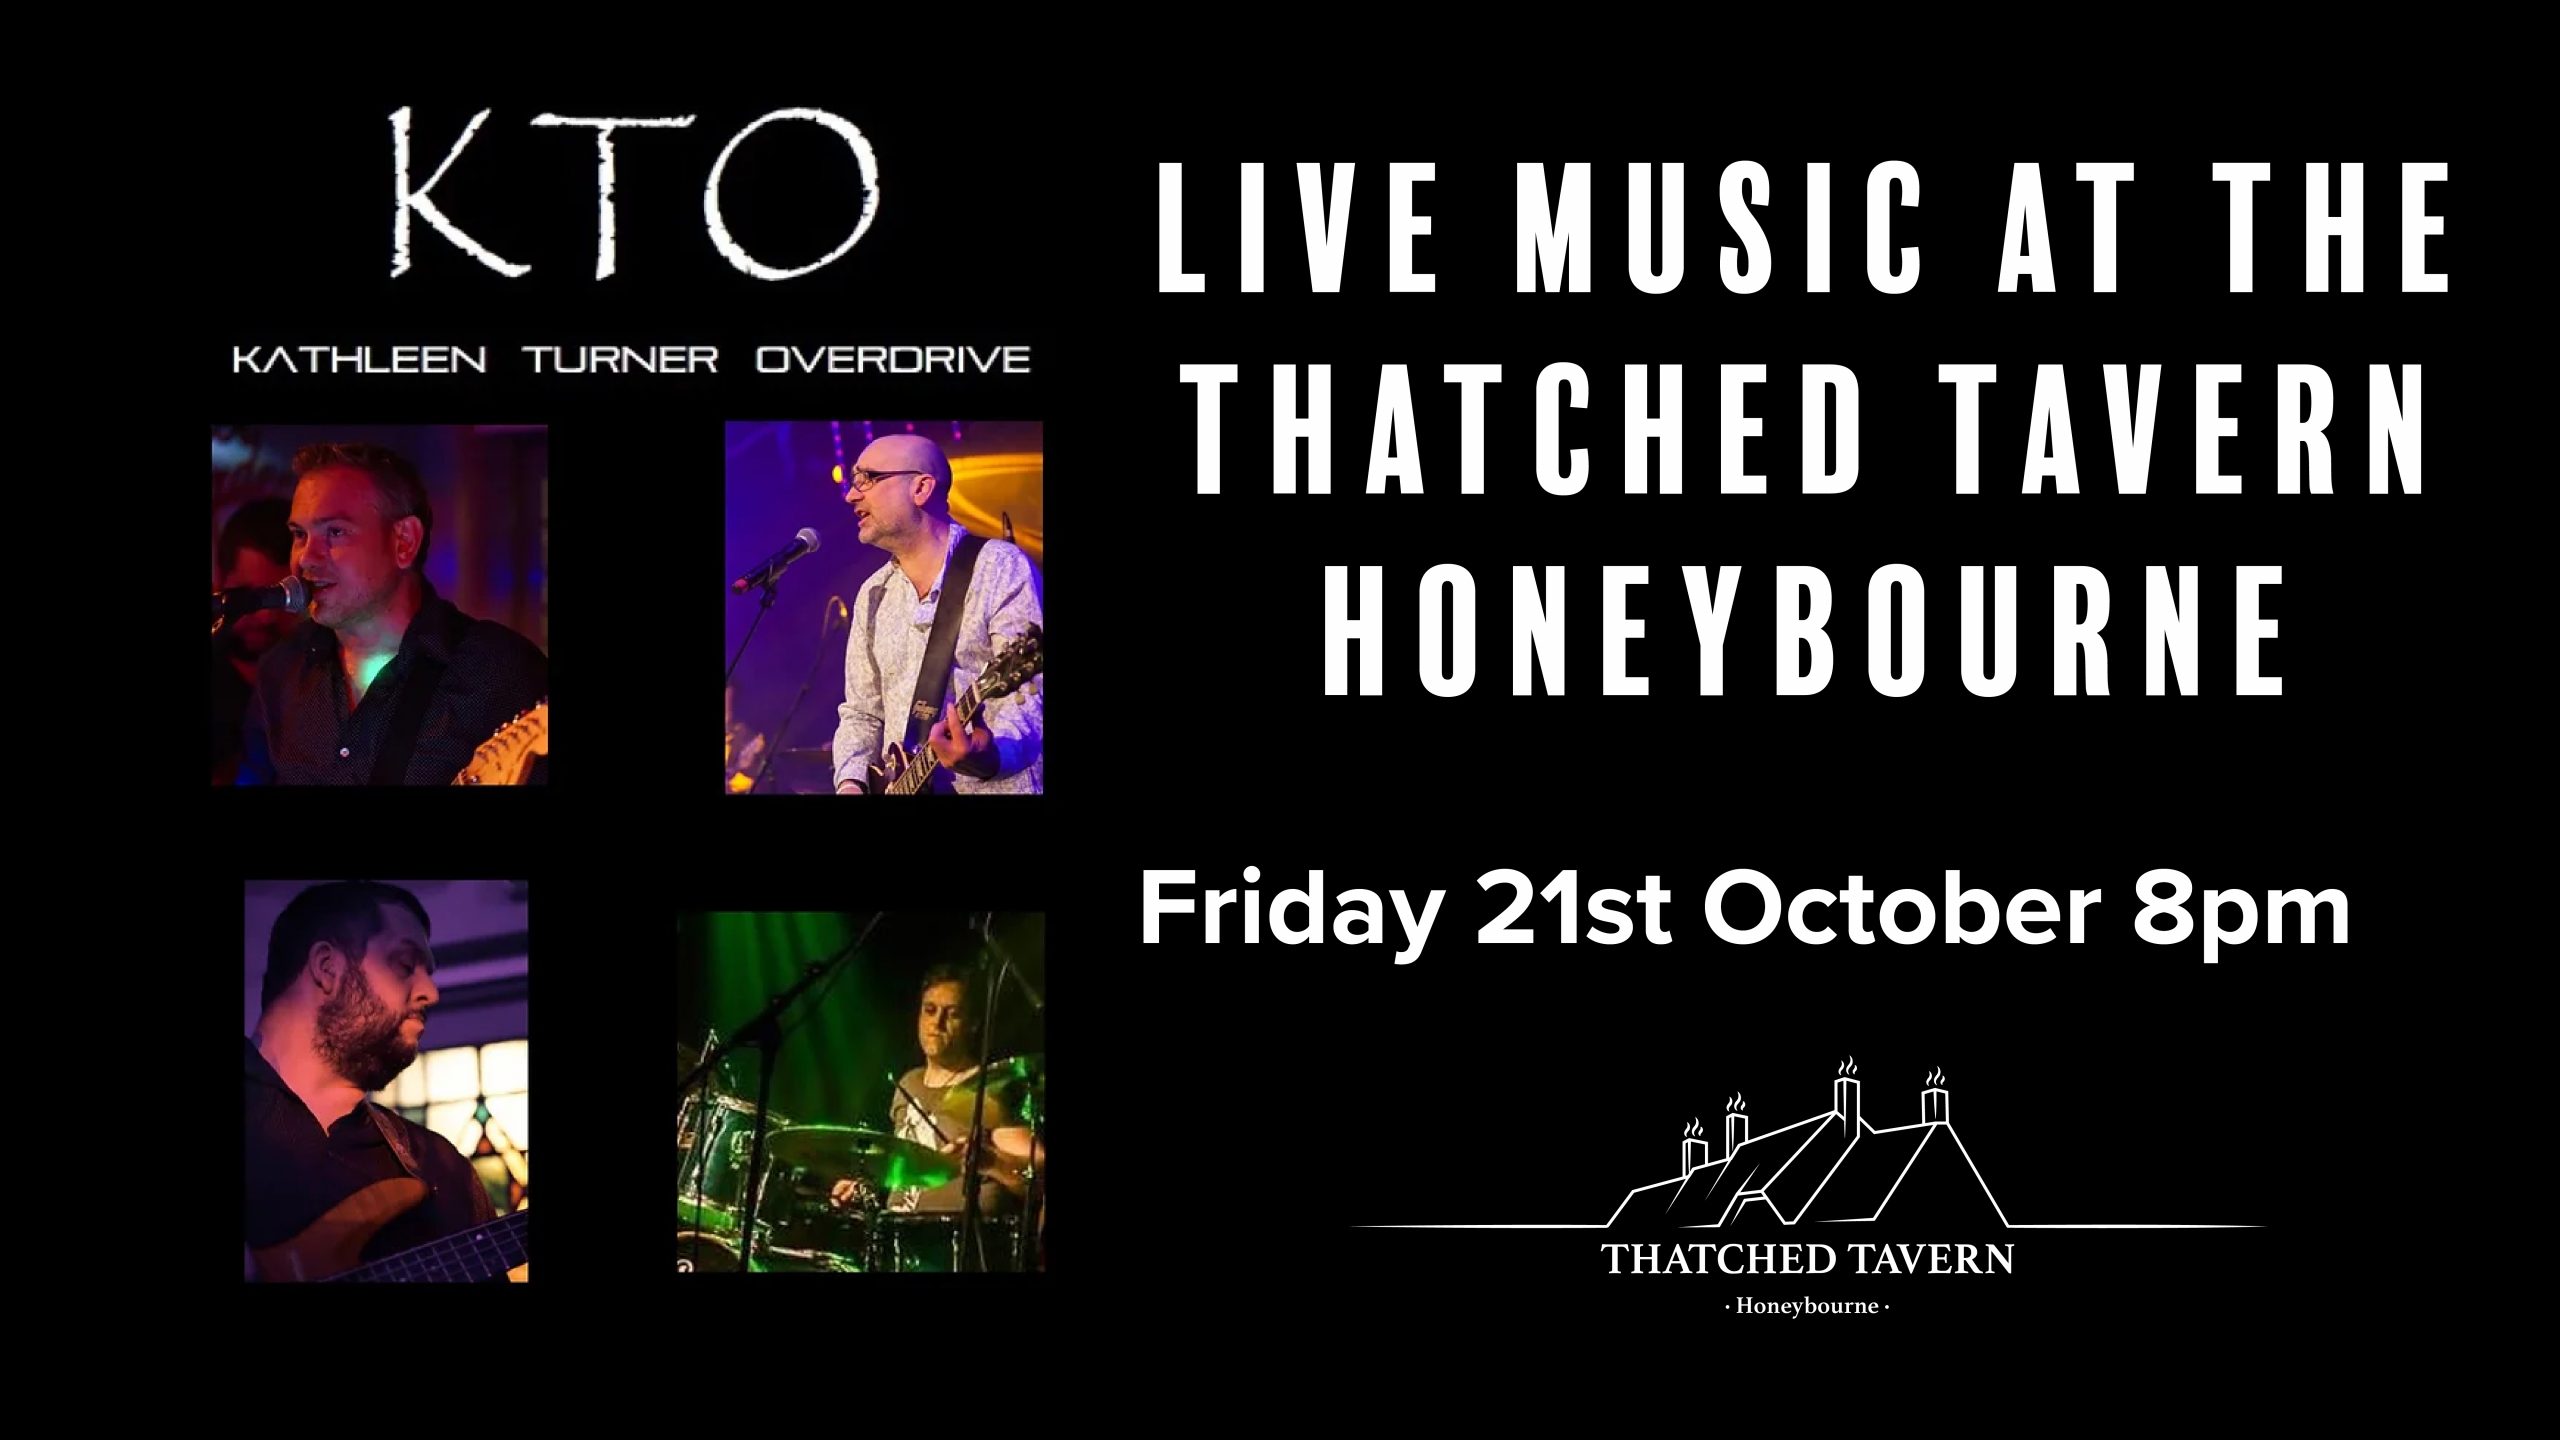 KTO - Kathleen Turner Overdrive at The Thatched Tavern Honeybourne